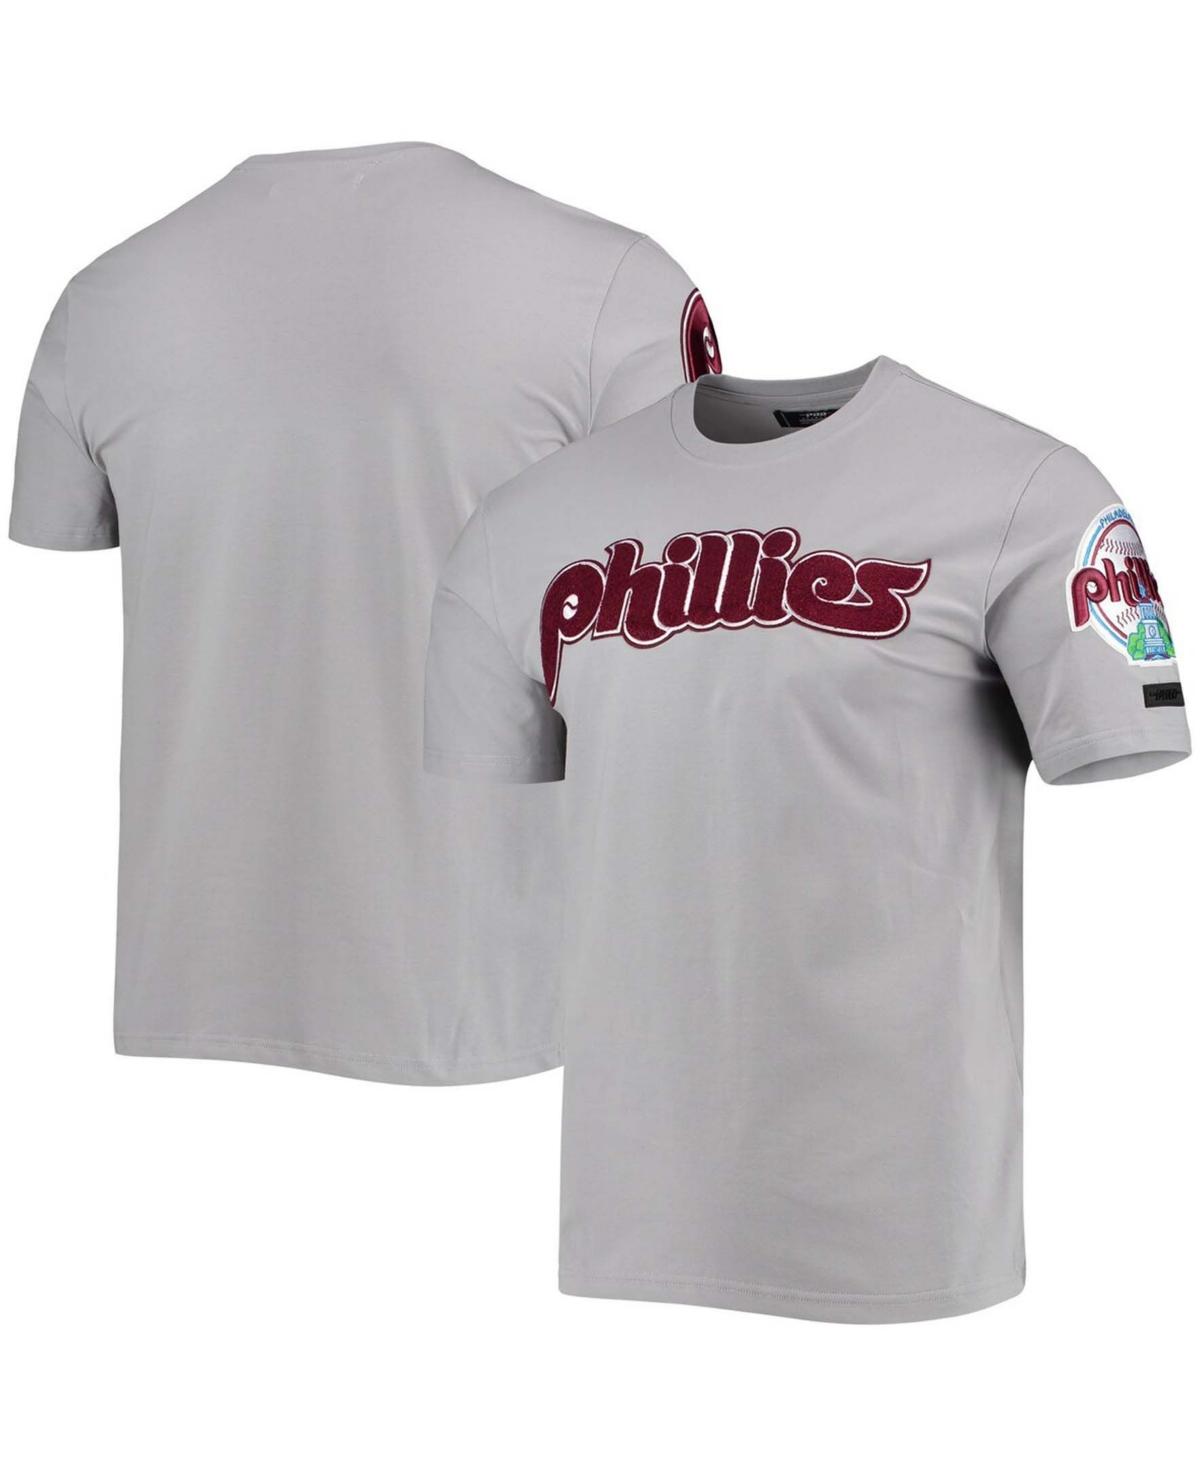 Phillies playoff gear on sale at team store in South Philadelphia 